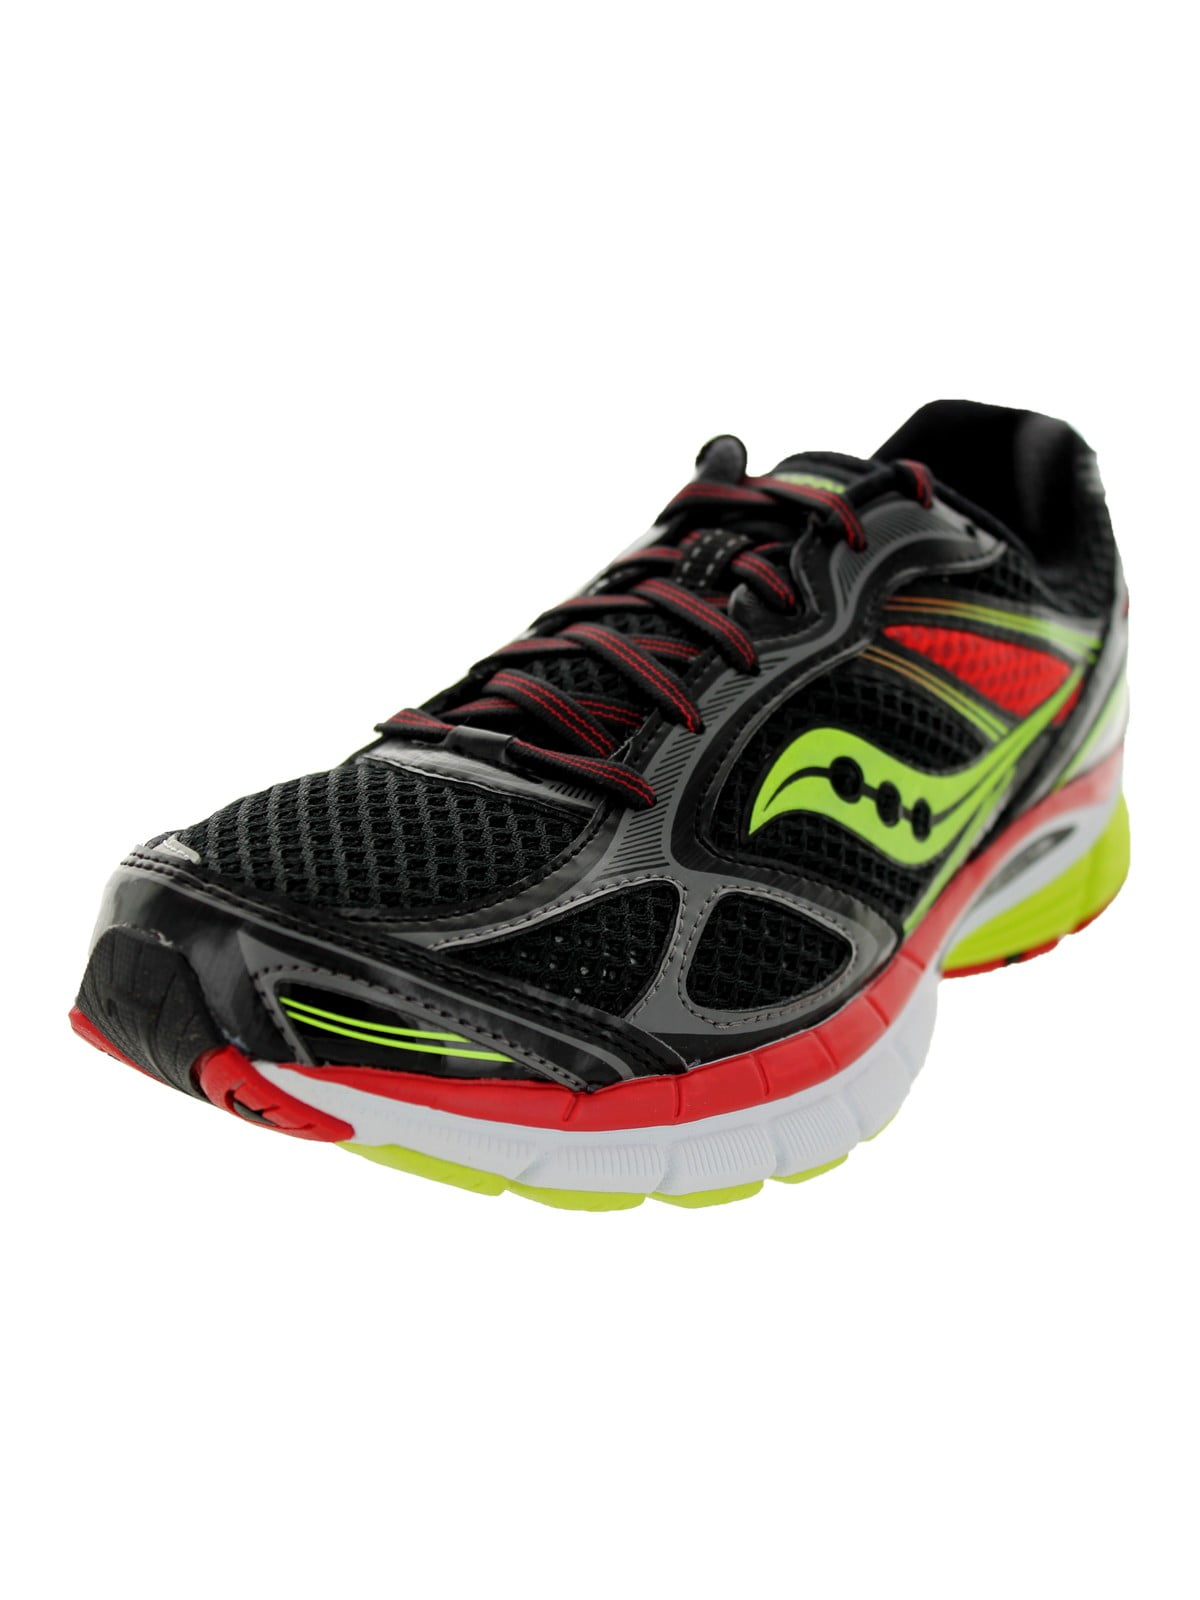 saucony powergrid guide 7 men's running shoes